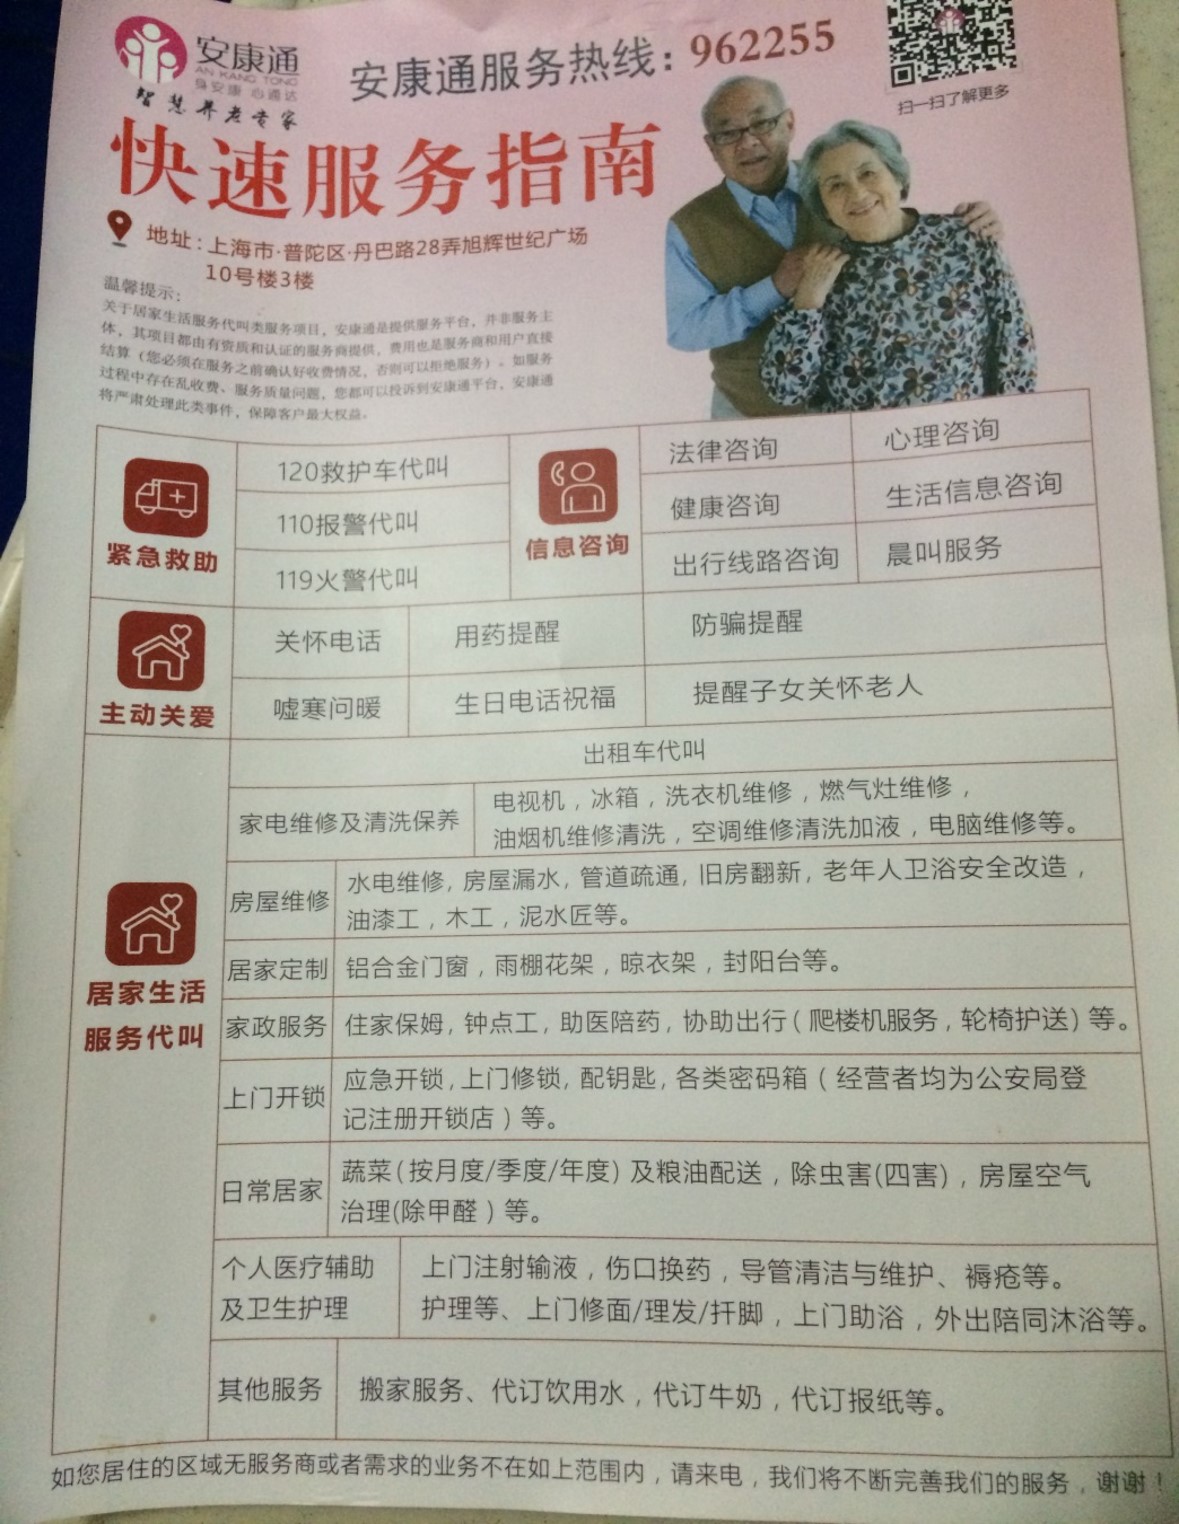 service guide poster for Ankang Tong safety & health communications company (photo by Tianshu Pan)